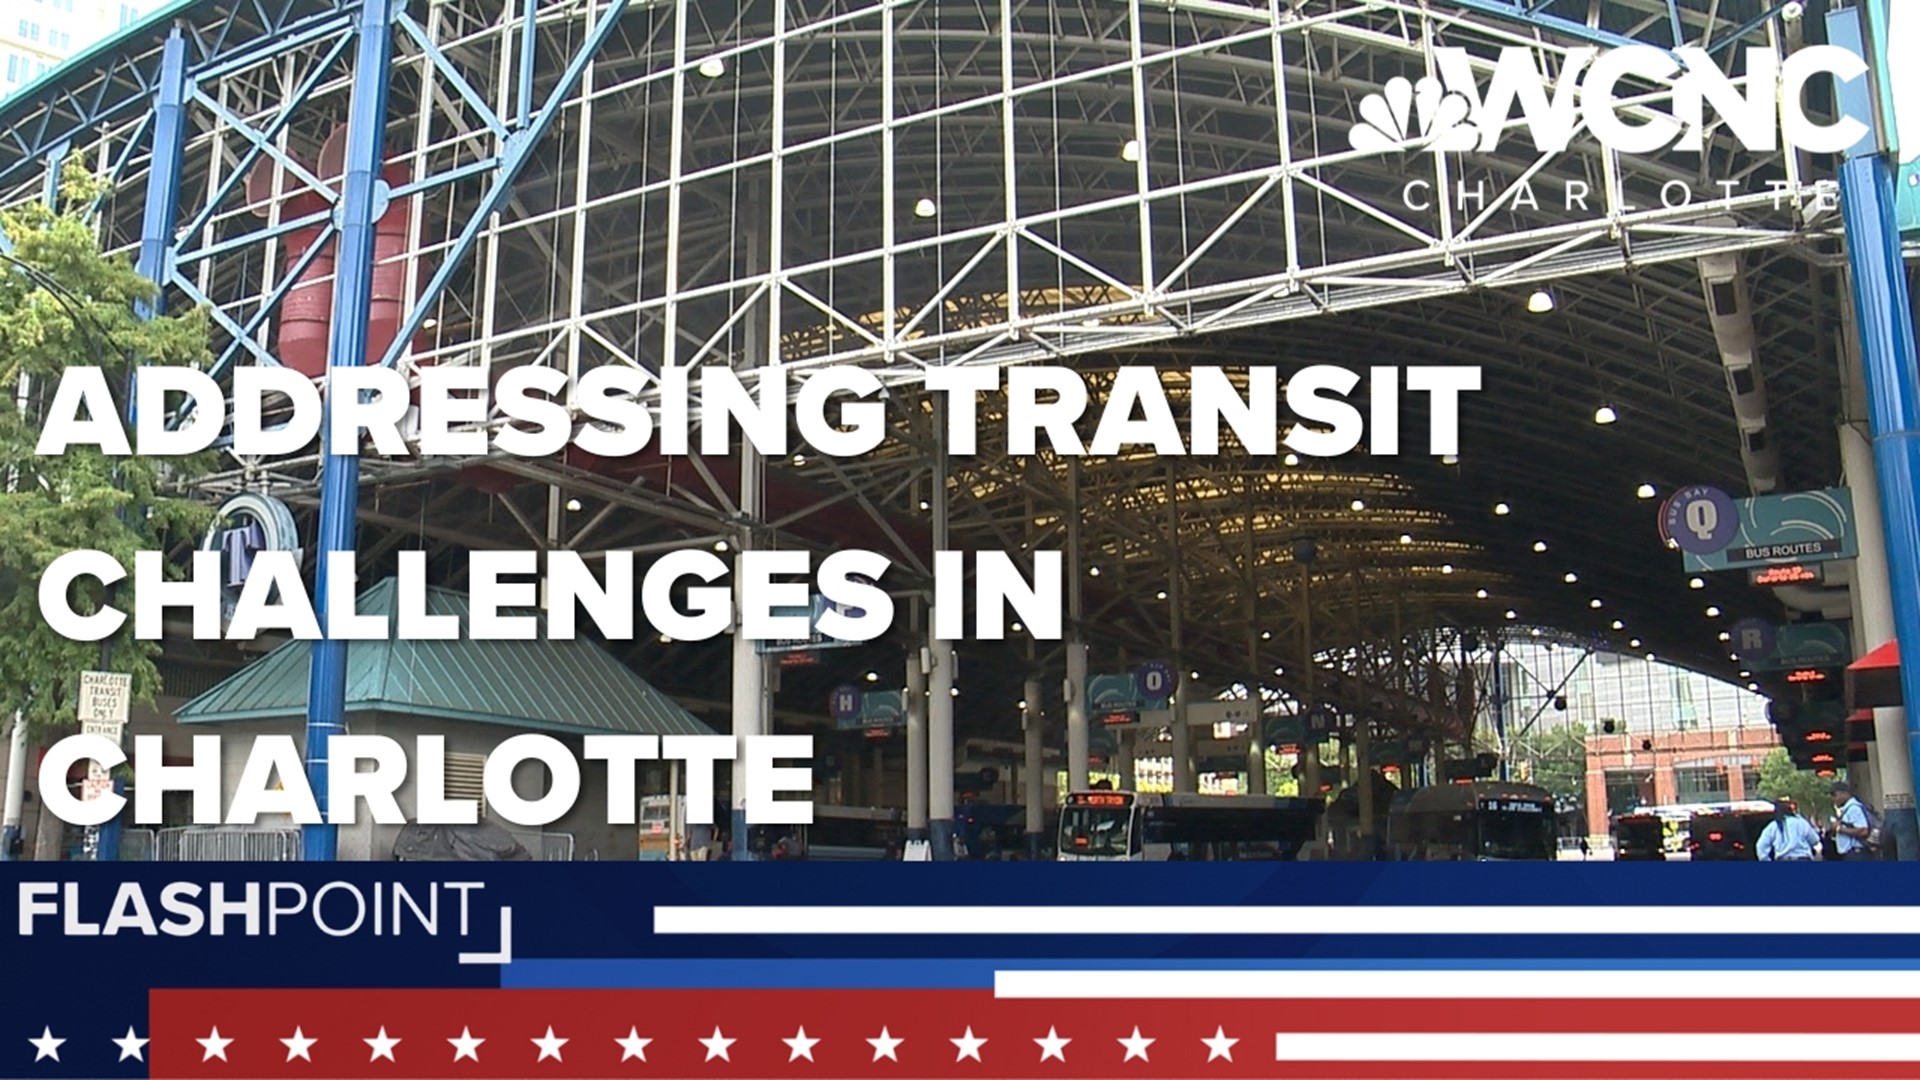 Amid the recent problems, Charlotte leaders are looking to expand transit and transportation options.